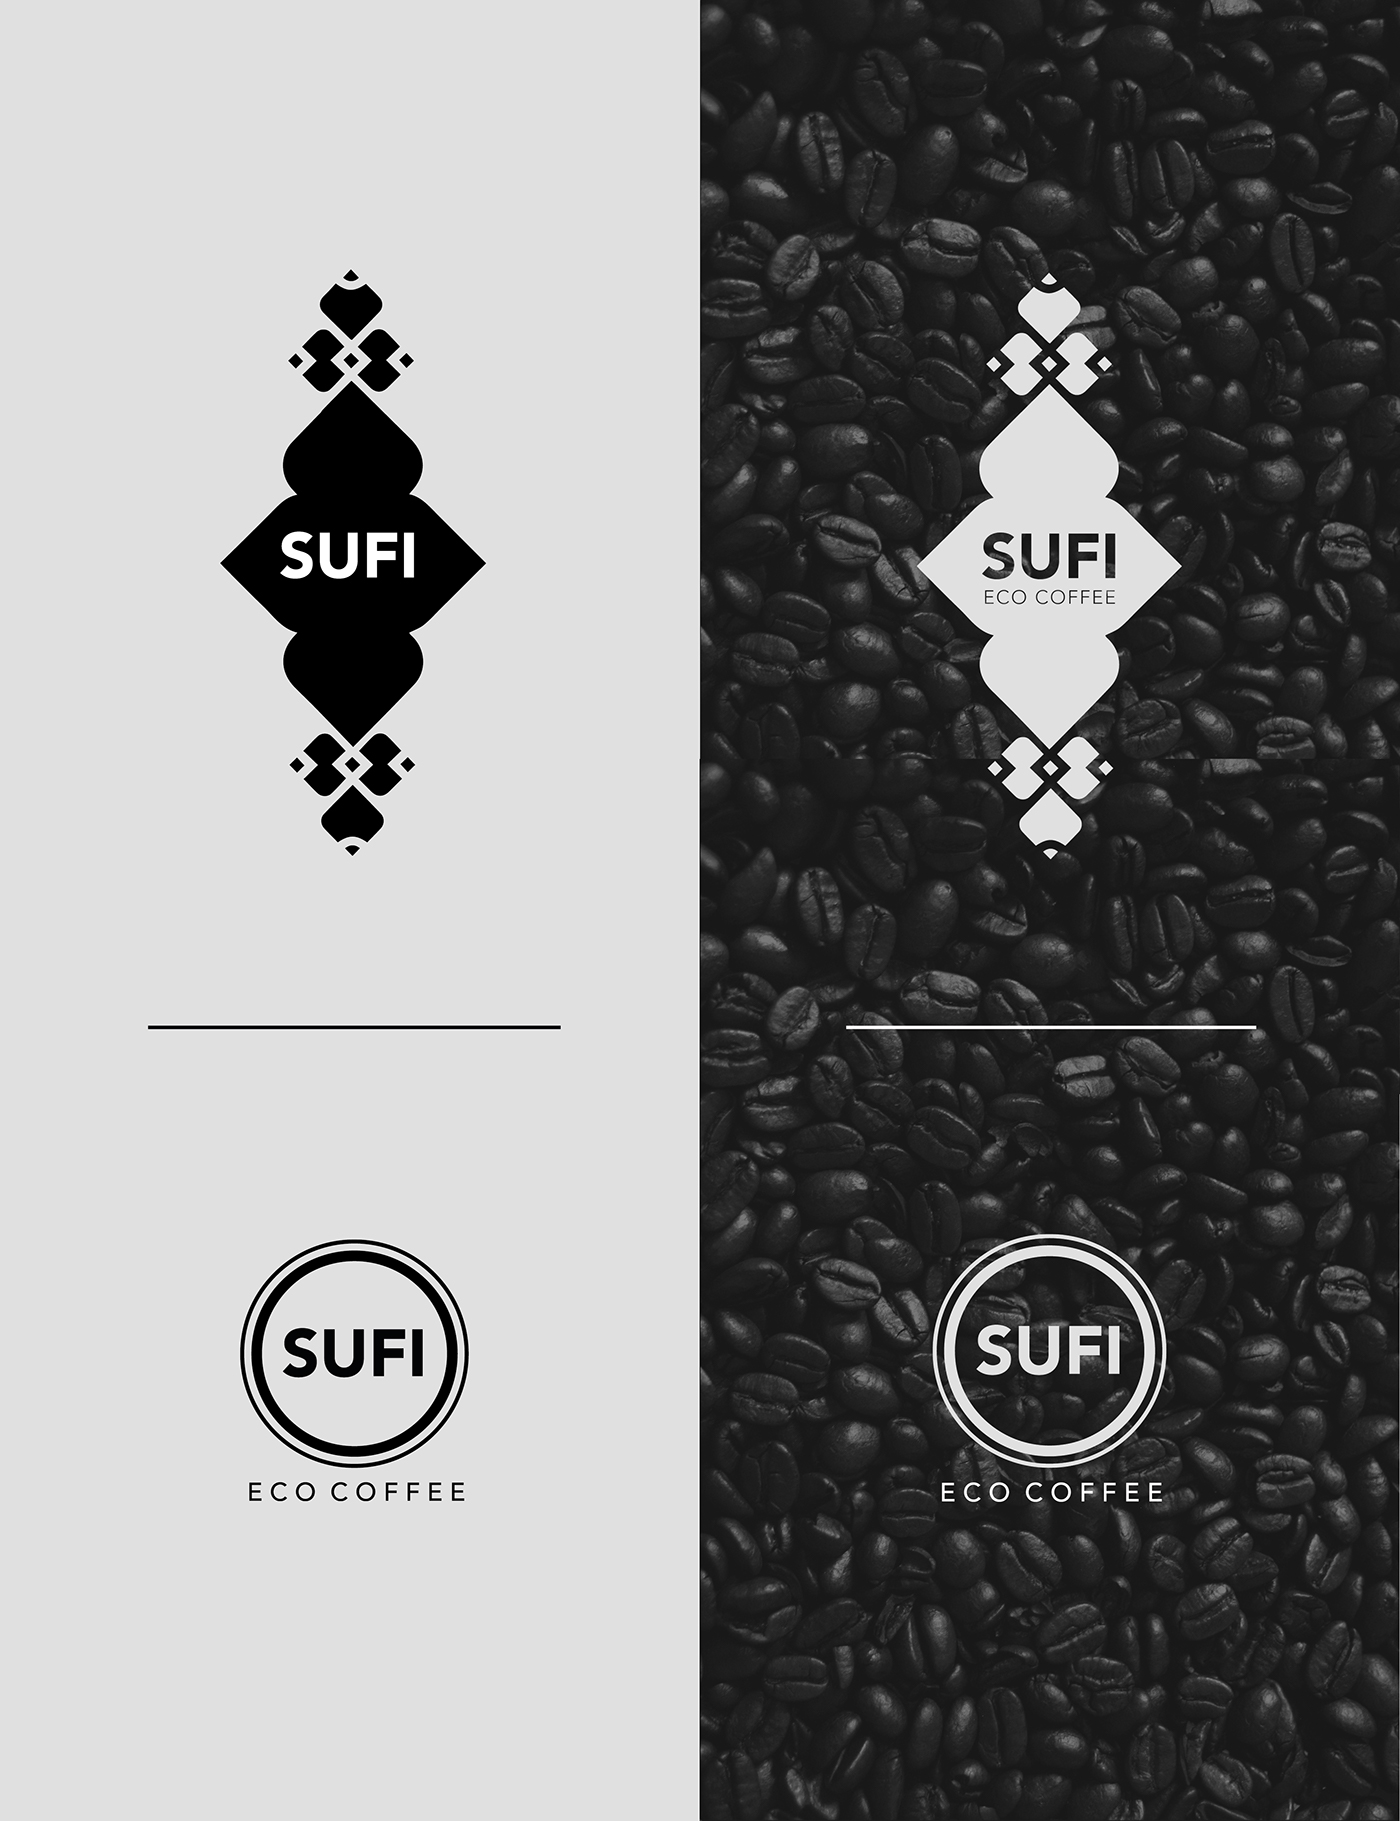 eco arabic espresso Coffee natural Quality fair trade Ethical flow pack capsules businesscard logo pattern sufi